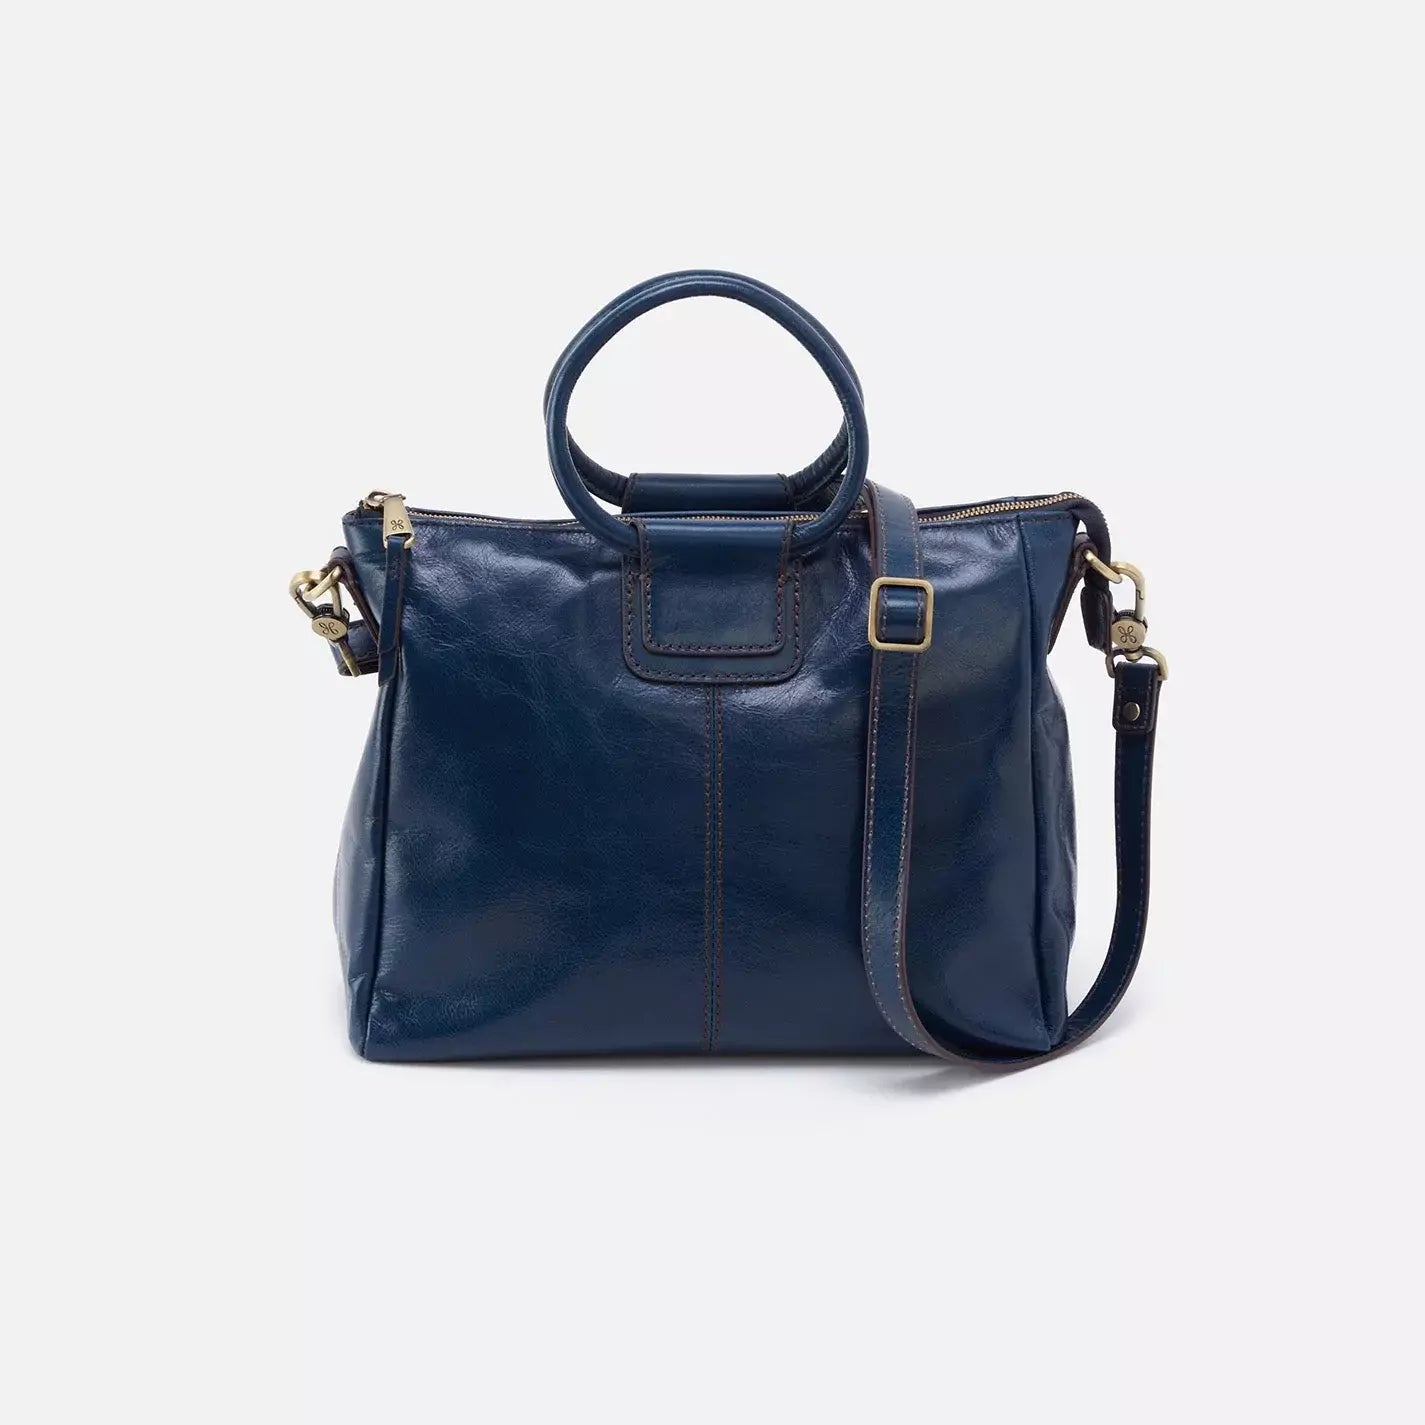 The Sheila medium-sized satchel in denim makes for the perfect everyday bag when opting to travel light. Crafted in our Vintage Hide leather that only gets more beautiful over time with use and wear.